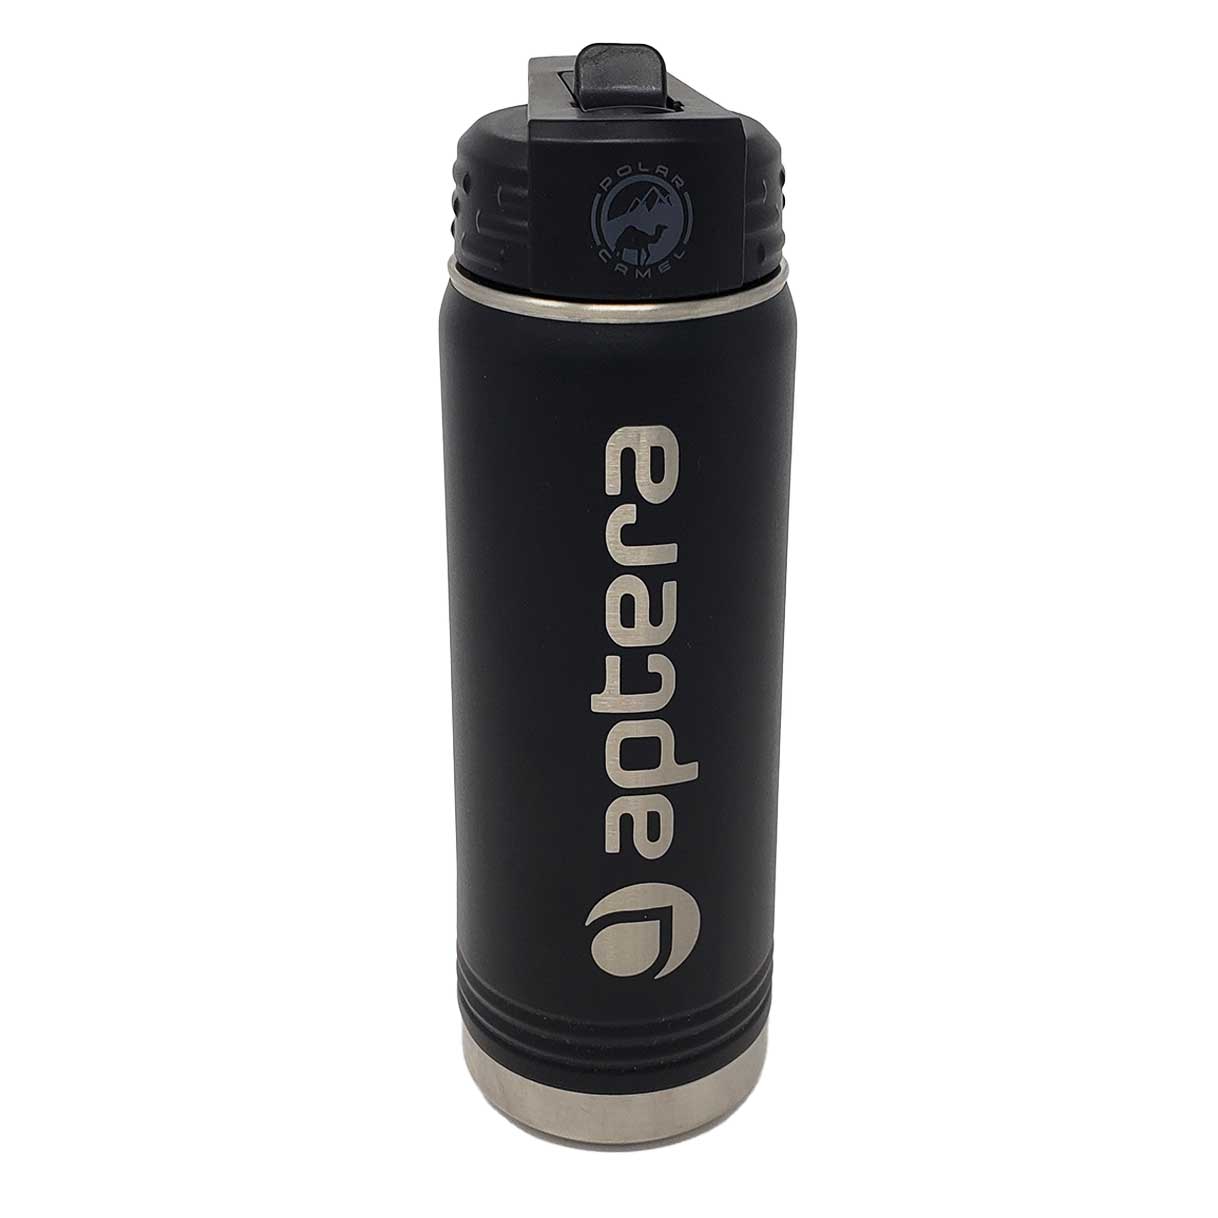 Shop for Stainless Steel Insulated Water Bottles